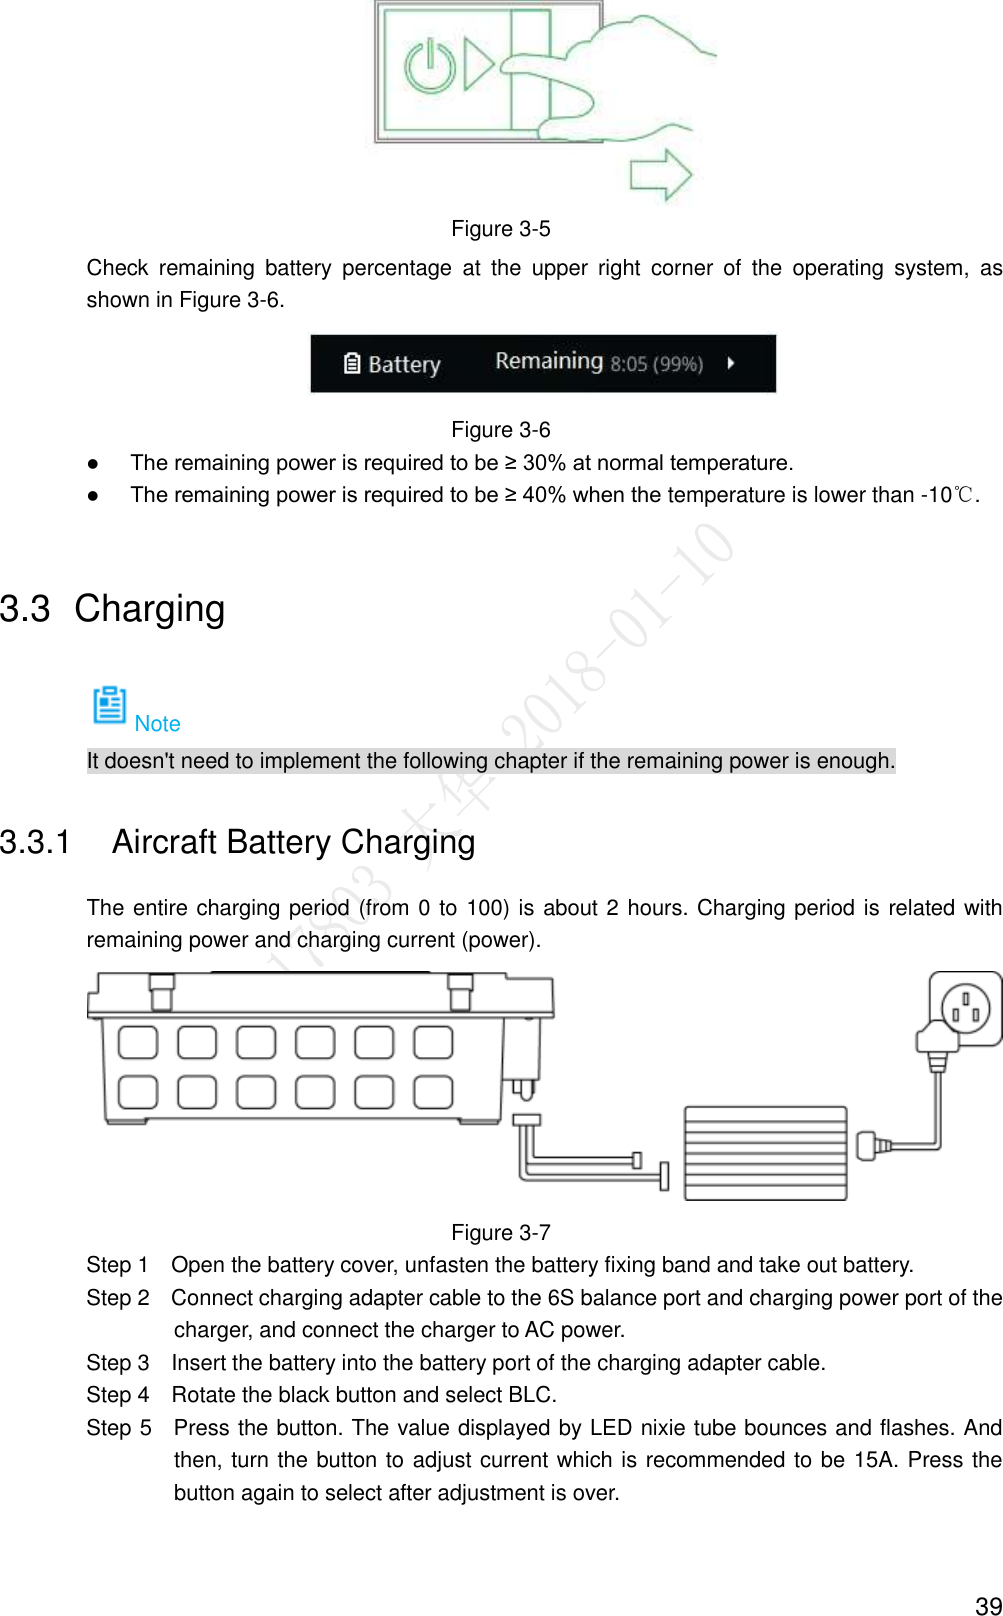  39  Figure 3-5 Check  remaining  battery  percentage  at  the  upper  right  corner  of  the  operating  system,  as shown in Figure 3-6.  Figure 3-6  The remaining power is required to be ≥ 30% at normal temperature.  The remaining power is required to be ≥ 40% when the temperature is lower than -10℃. 3.3  Charging Note It doesn&apos;t need to implement the following chapter if the remaining power is enough. 3.3.1  Aircraft Battery Charging The entire charging period (from 0 to 100) is about 2 hours. Charging period is related with remaining power and charging current (power).  Figure 3-7                 Step 1    Open the battery cover, unfasten the battery fixing band and take out battery.                 Step 2    Connect charging adapter cable to the 6S balance port and charging power port of the charger, and connect the charger to AC power.                 Step 3    Insert the battery into the battery port of the charging adapter cable.                 Step 4    Rotate the black button and select BLC.                 Step 5    Press the button. The value displayed by LED nixie tube bounces and flashes. And then, turn the button to adjust current which is recommended to be 15A. Press the button again to select after adjustment is over. 